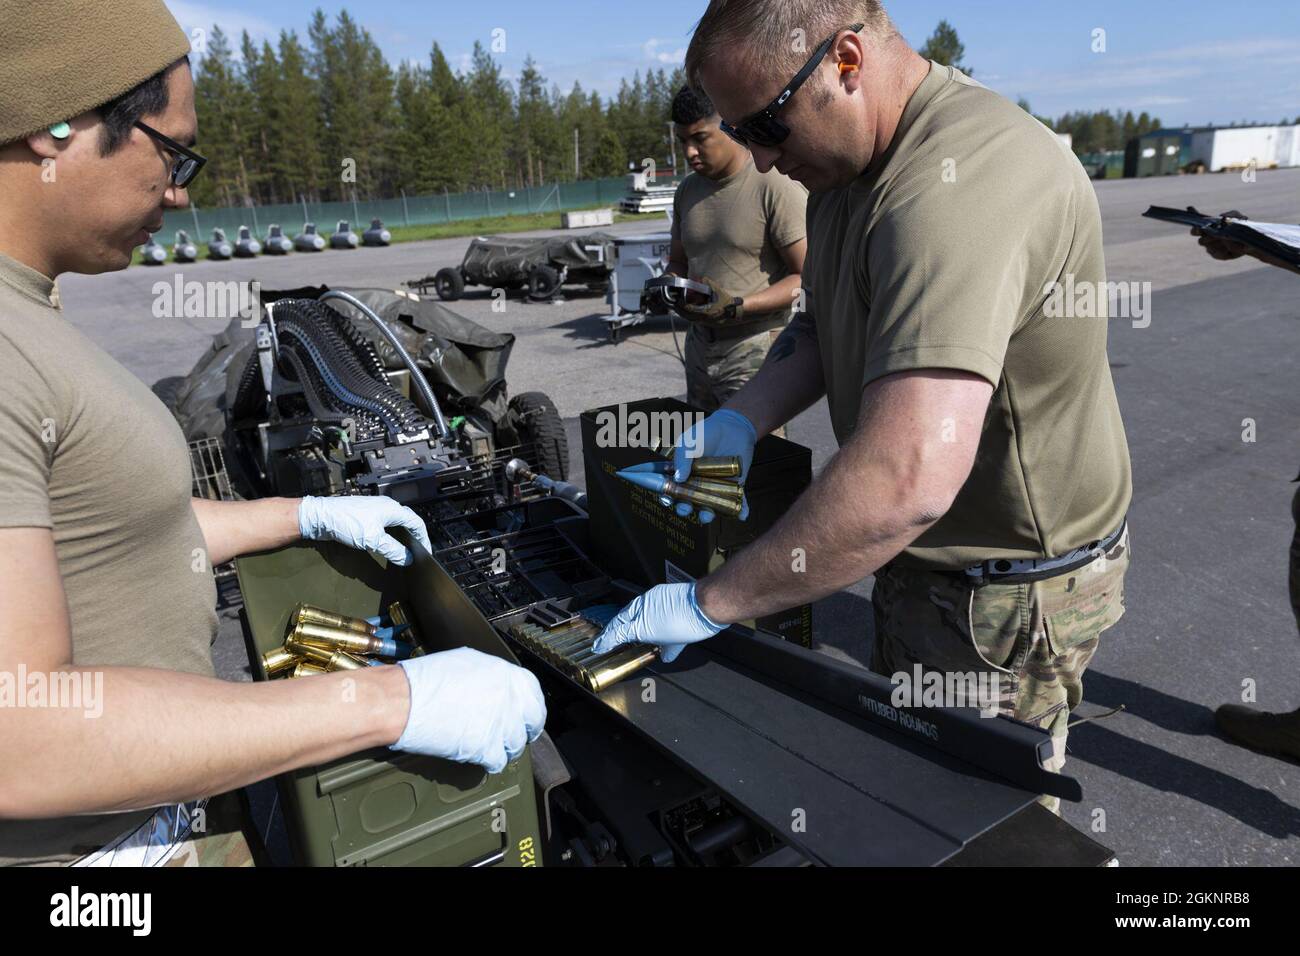 U.S. Air Force Airmen from the 52nd Maintenance Squadron at Spangdahlem Air Base, Germany, use a replenisher table equipped with a universal ammunition reloader at Kallax Air Base, Sweden, June 8, 2021. The UAL is a streamlined way to reload the weapons system of F-16 aircraft, which in this instance is loaded with rubber tipped bullets for training purposes during the Arctic Challenge Exercise 2021. Stock Photo